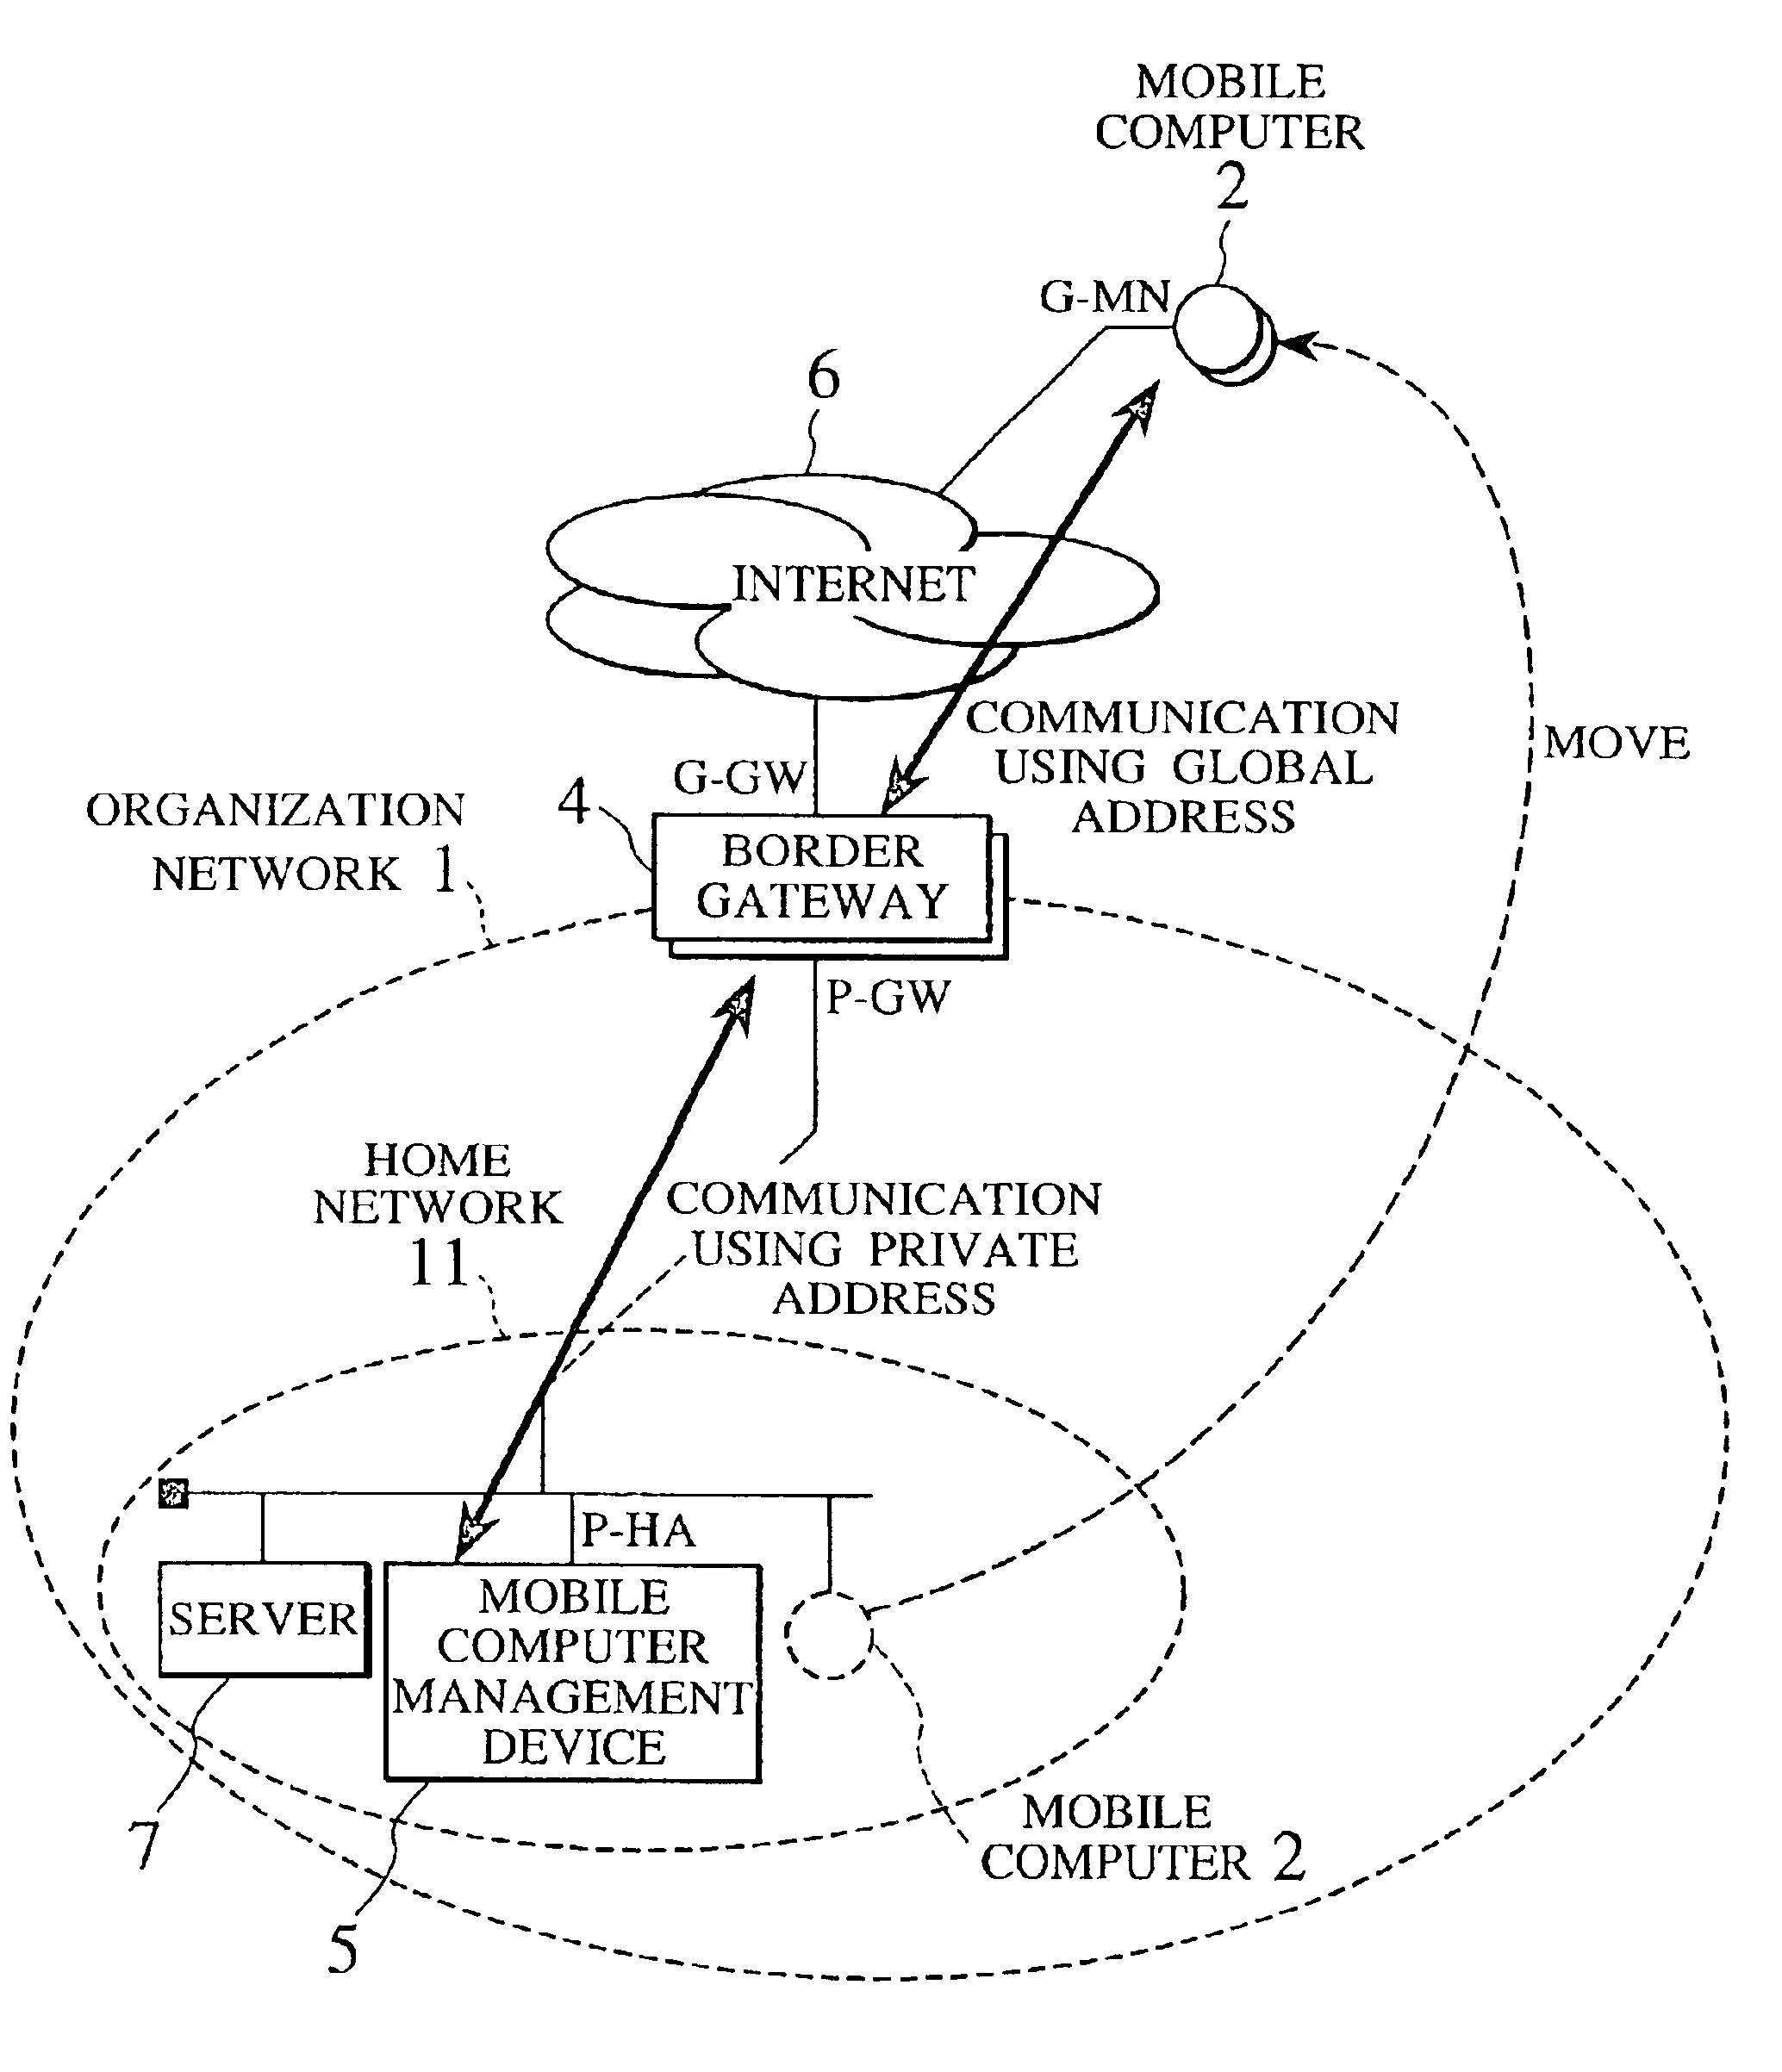 Mobile IP communication scheme for supporting mobile computer move over different address spaces